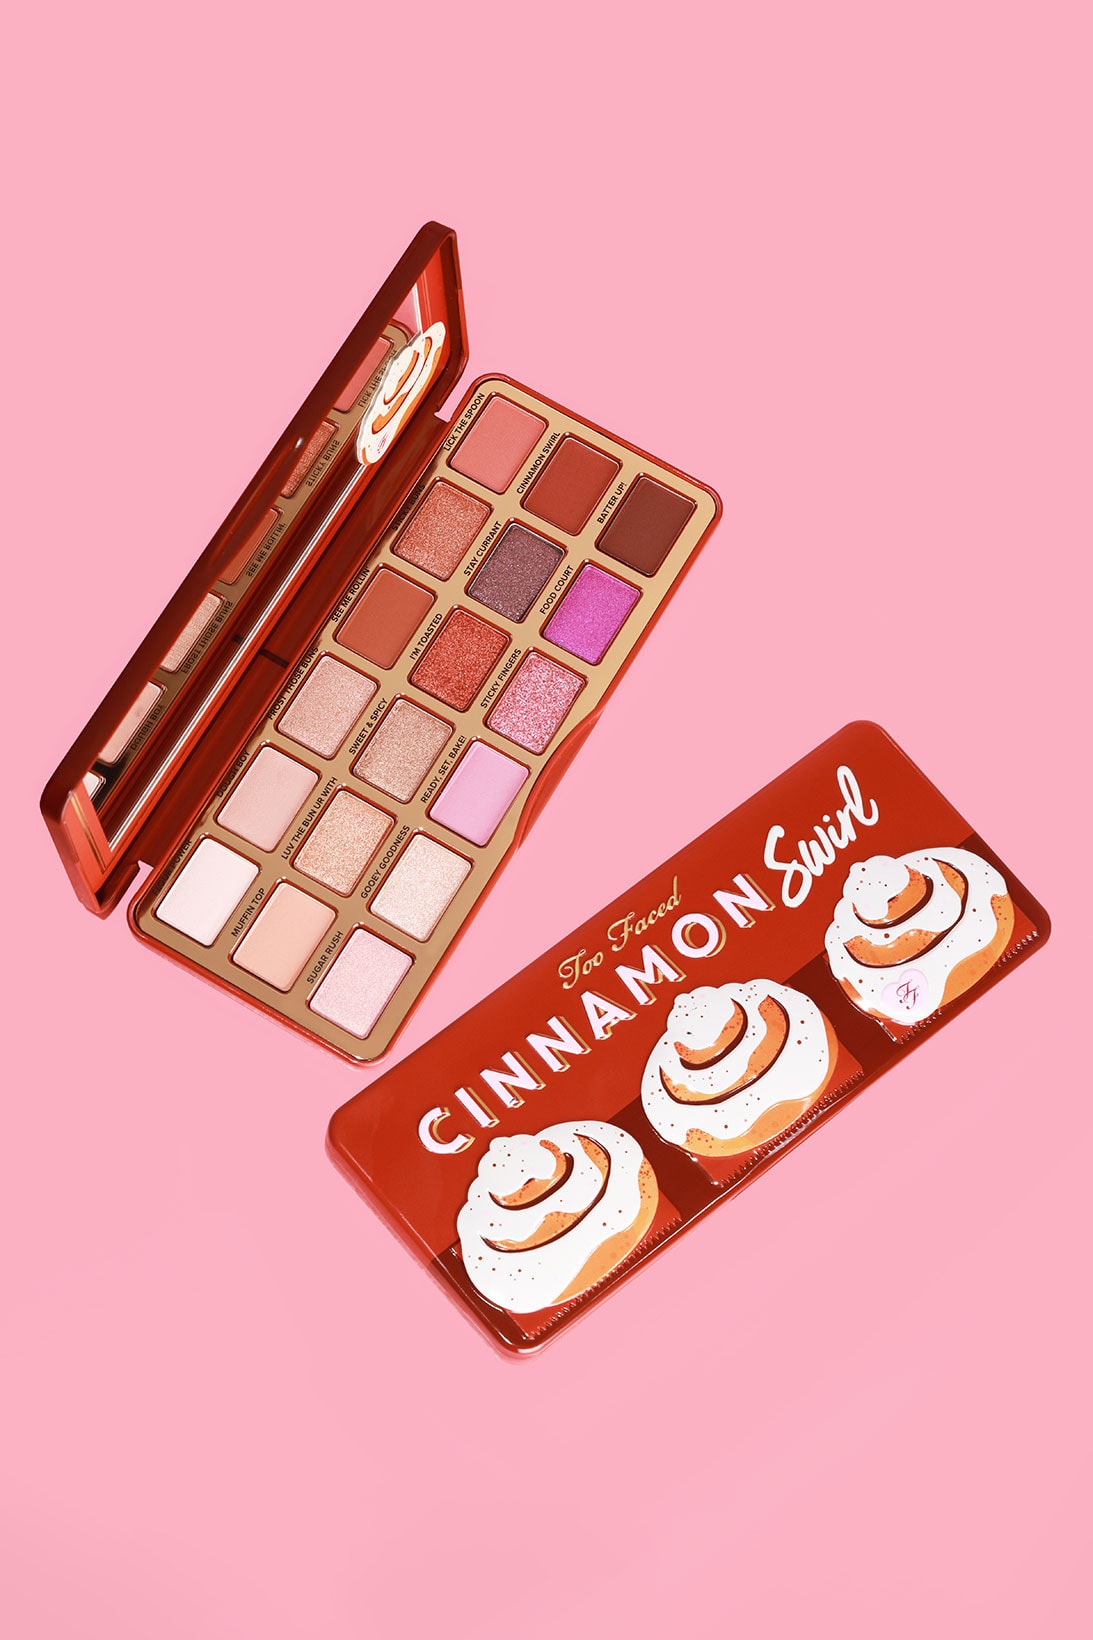 Too Faced Holiday Christmas Collection Makeup Cinnamon Bun Melted Matte Lipstick Swirl Eyeshadow Palette